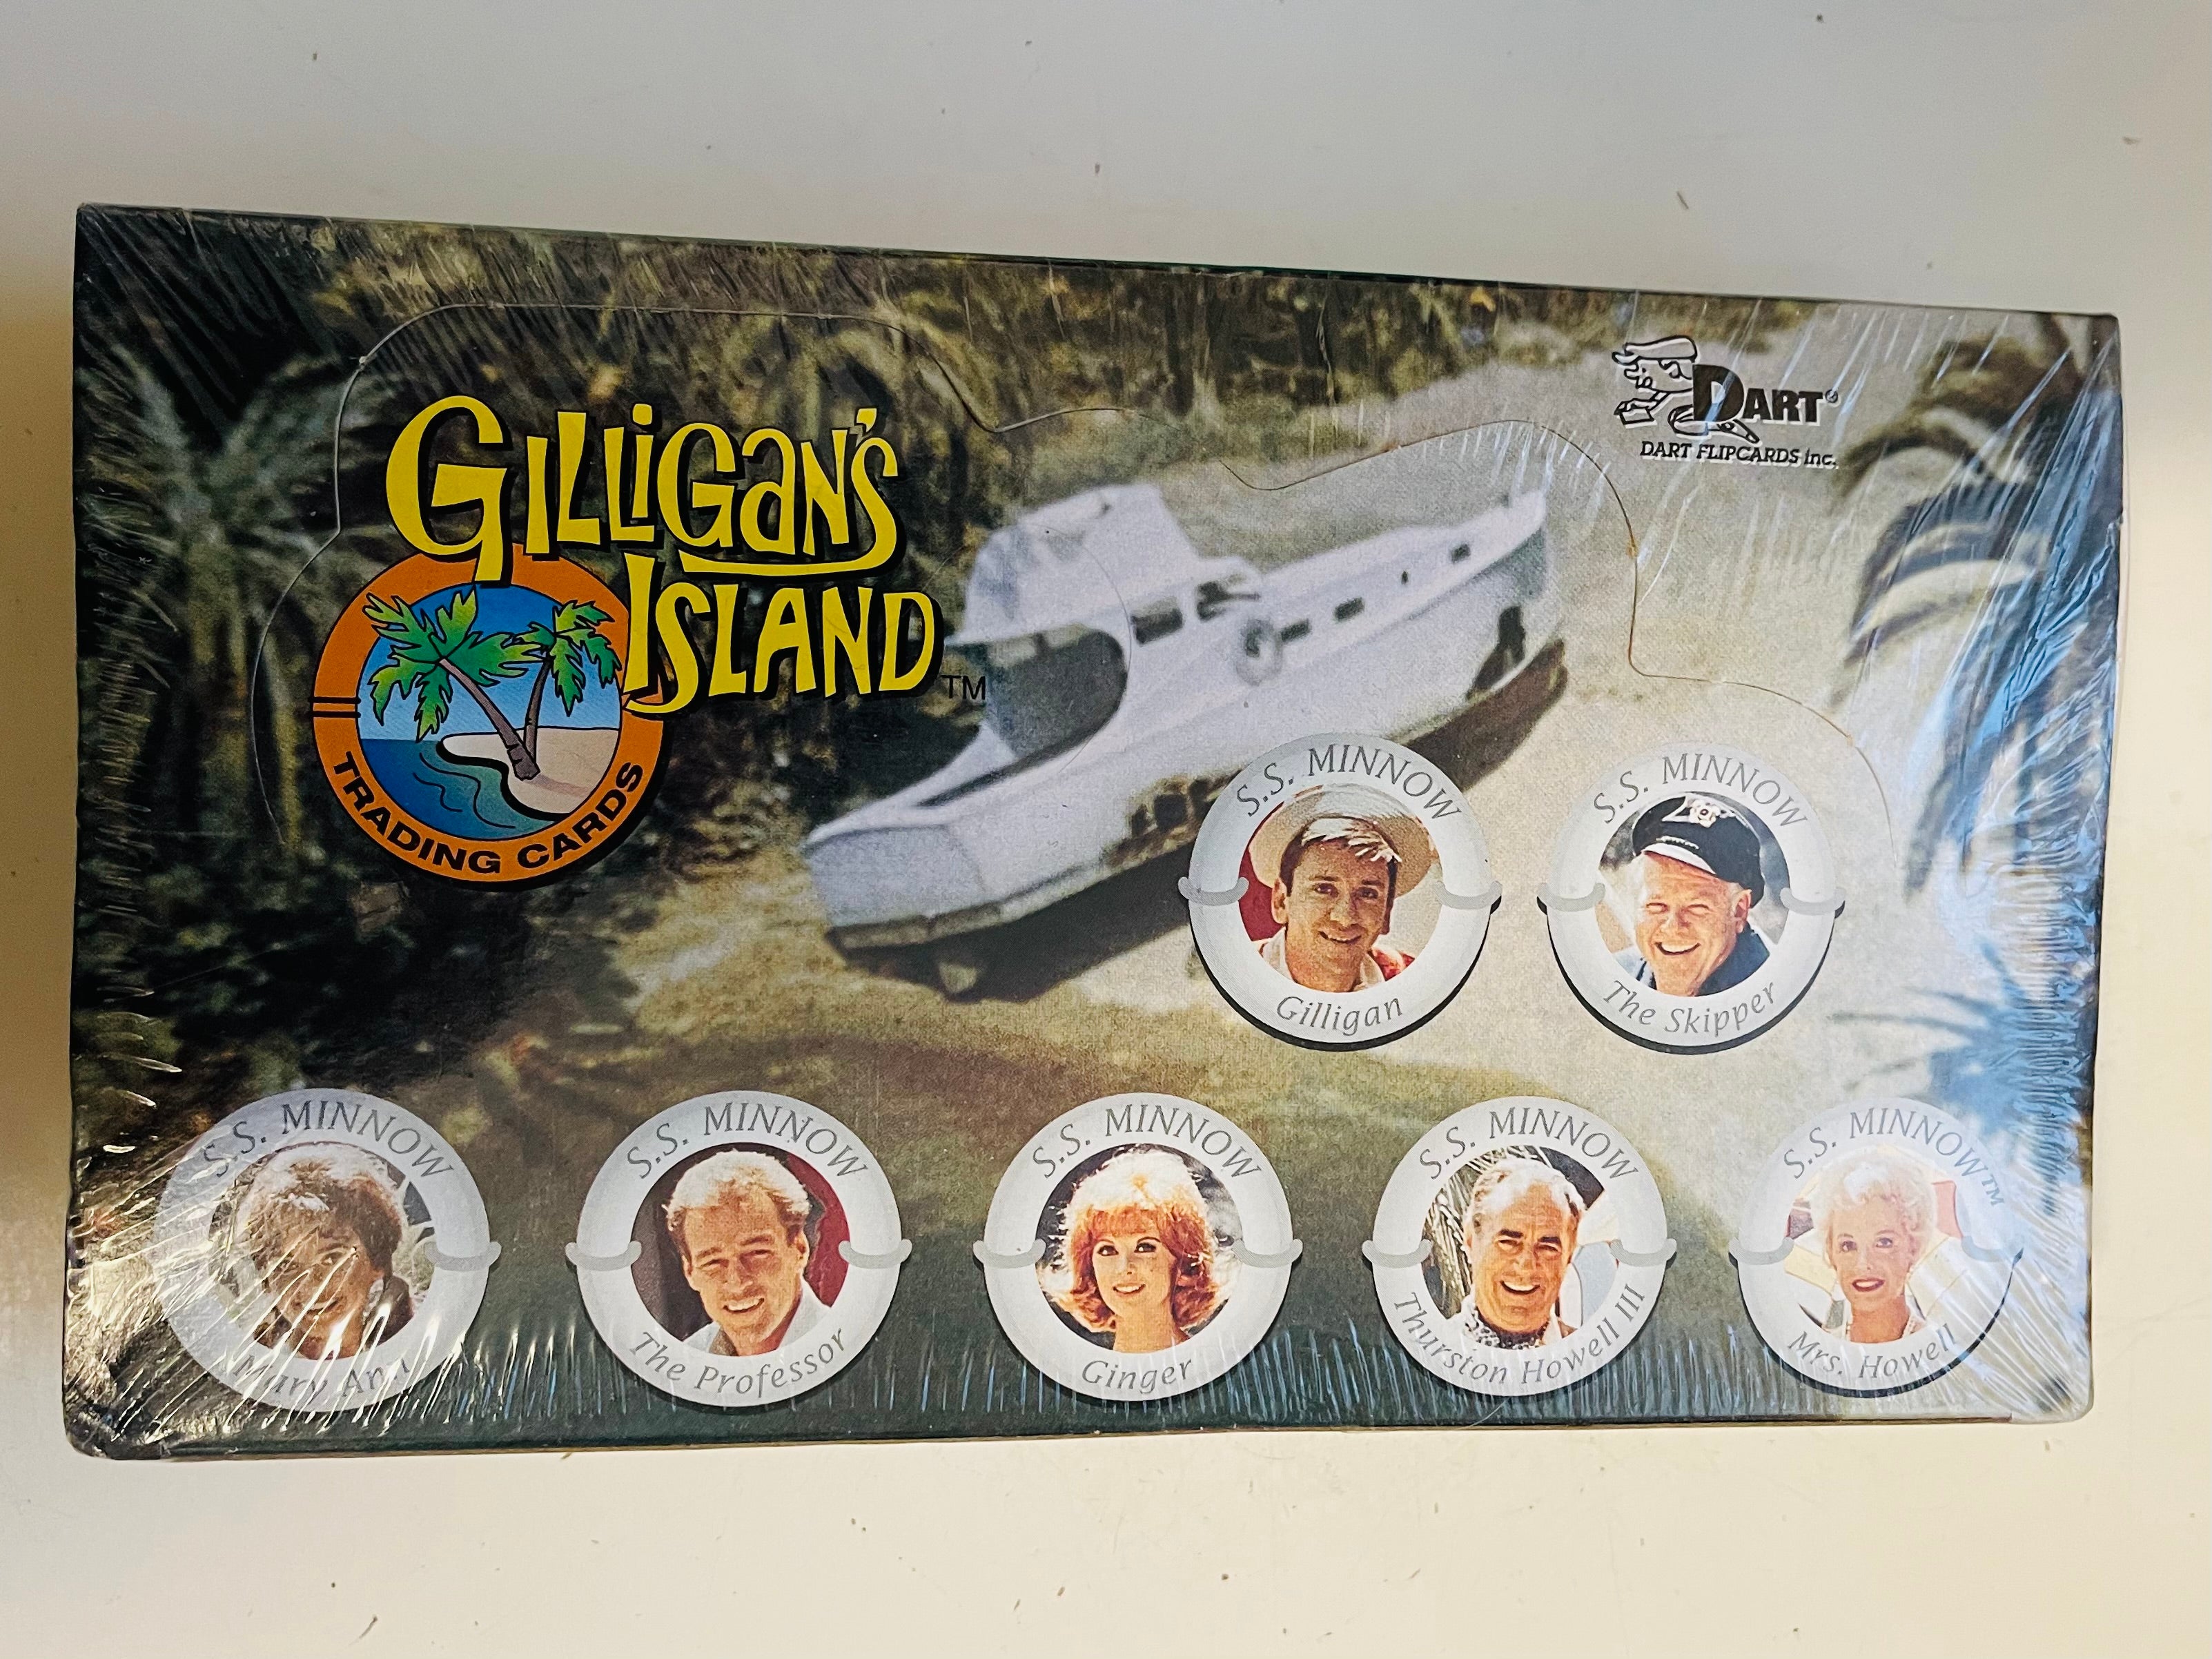 Gilligan’s Island TV show cards factory sealed box 1998